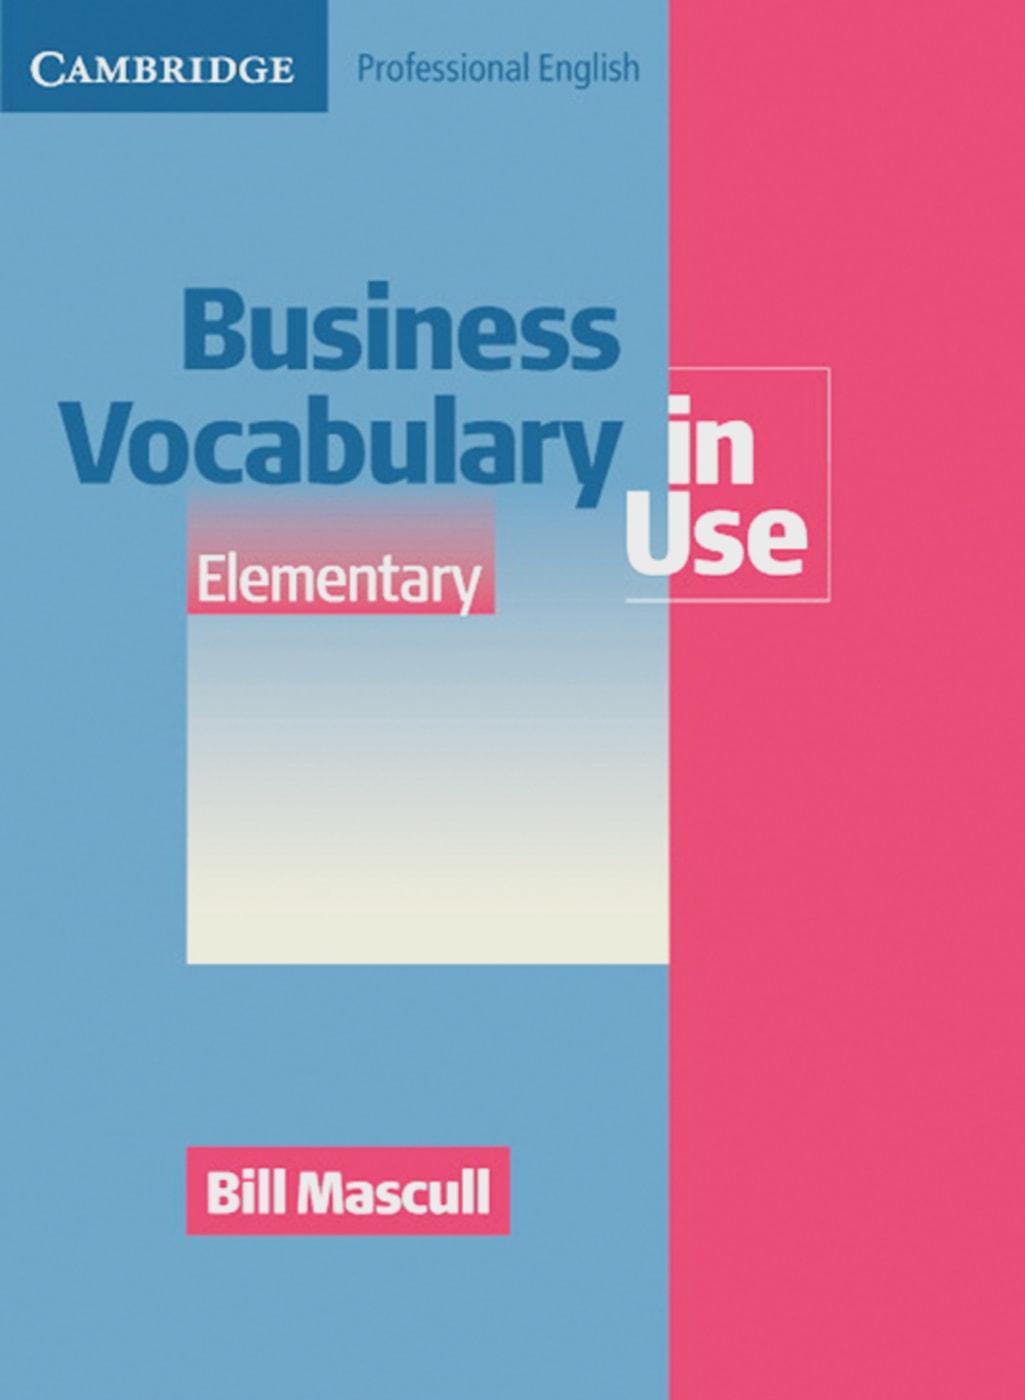 with　in　w.　Business　to　Pre-intermediate,　answers,　Vocabulary　Elementary　Use　CD-ROM